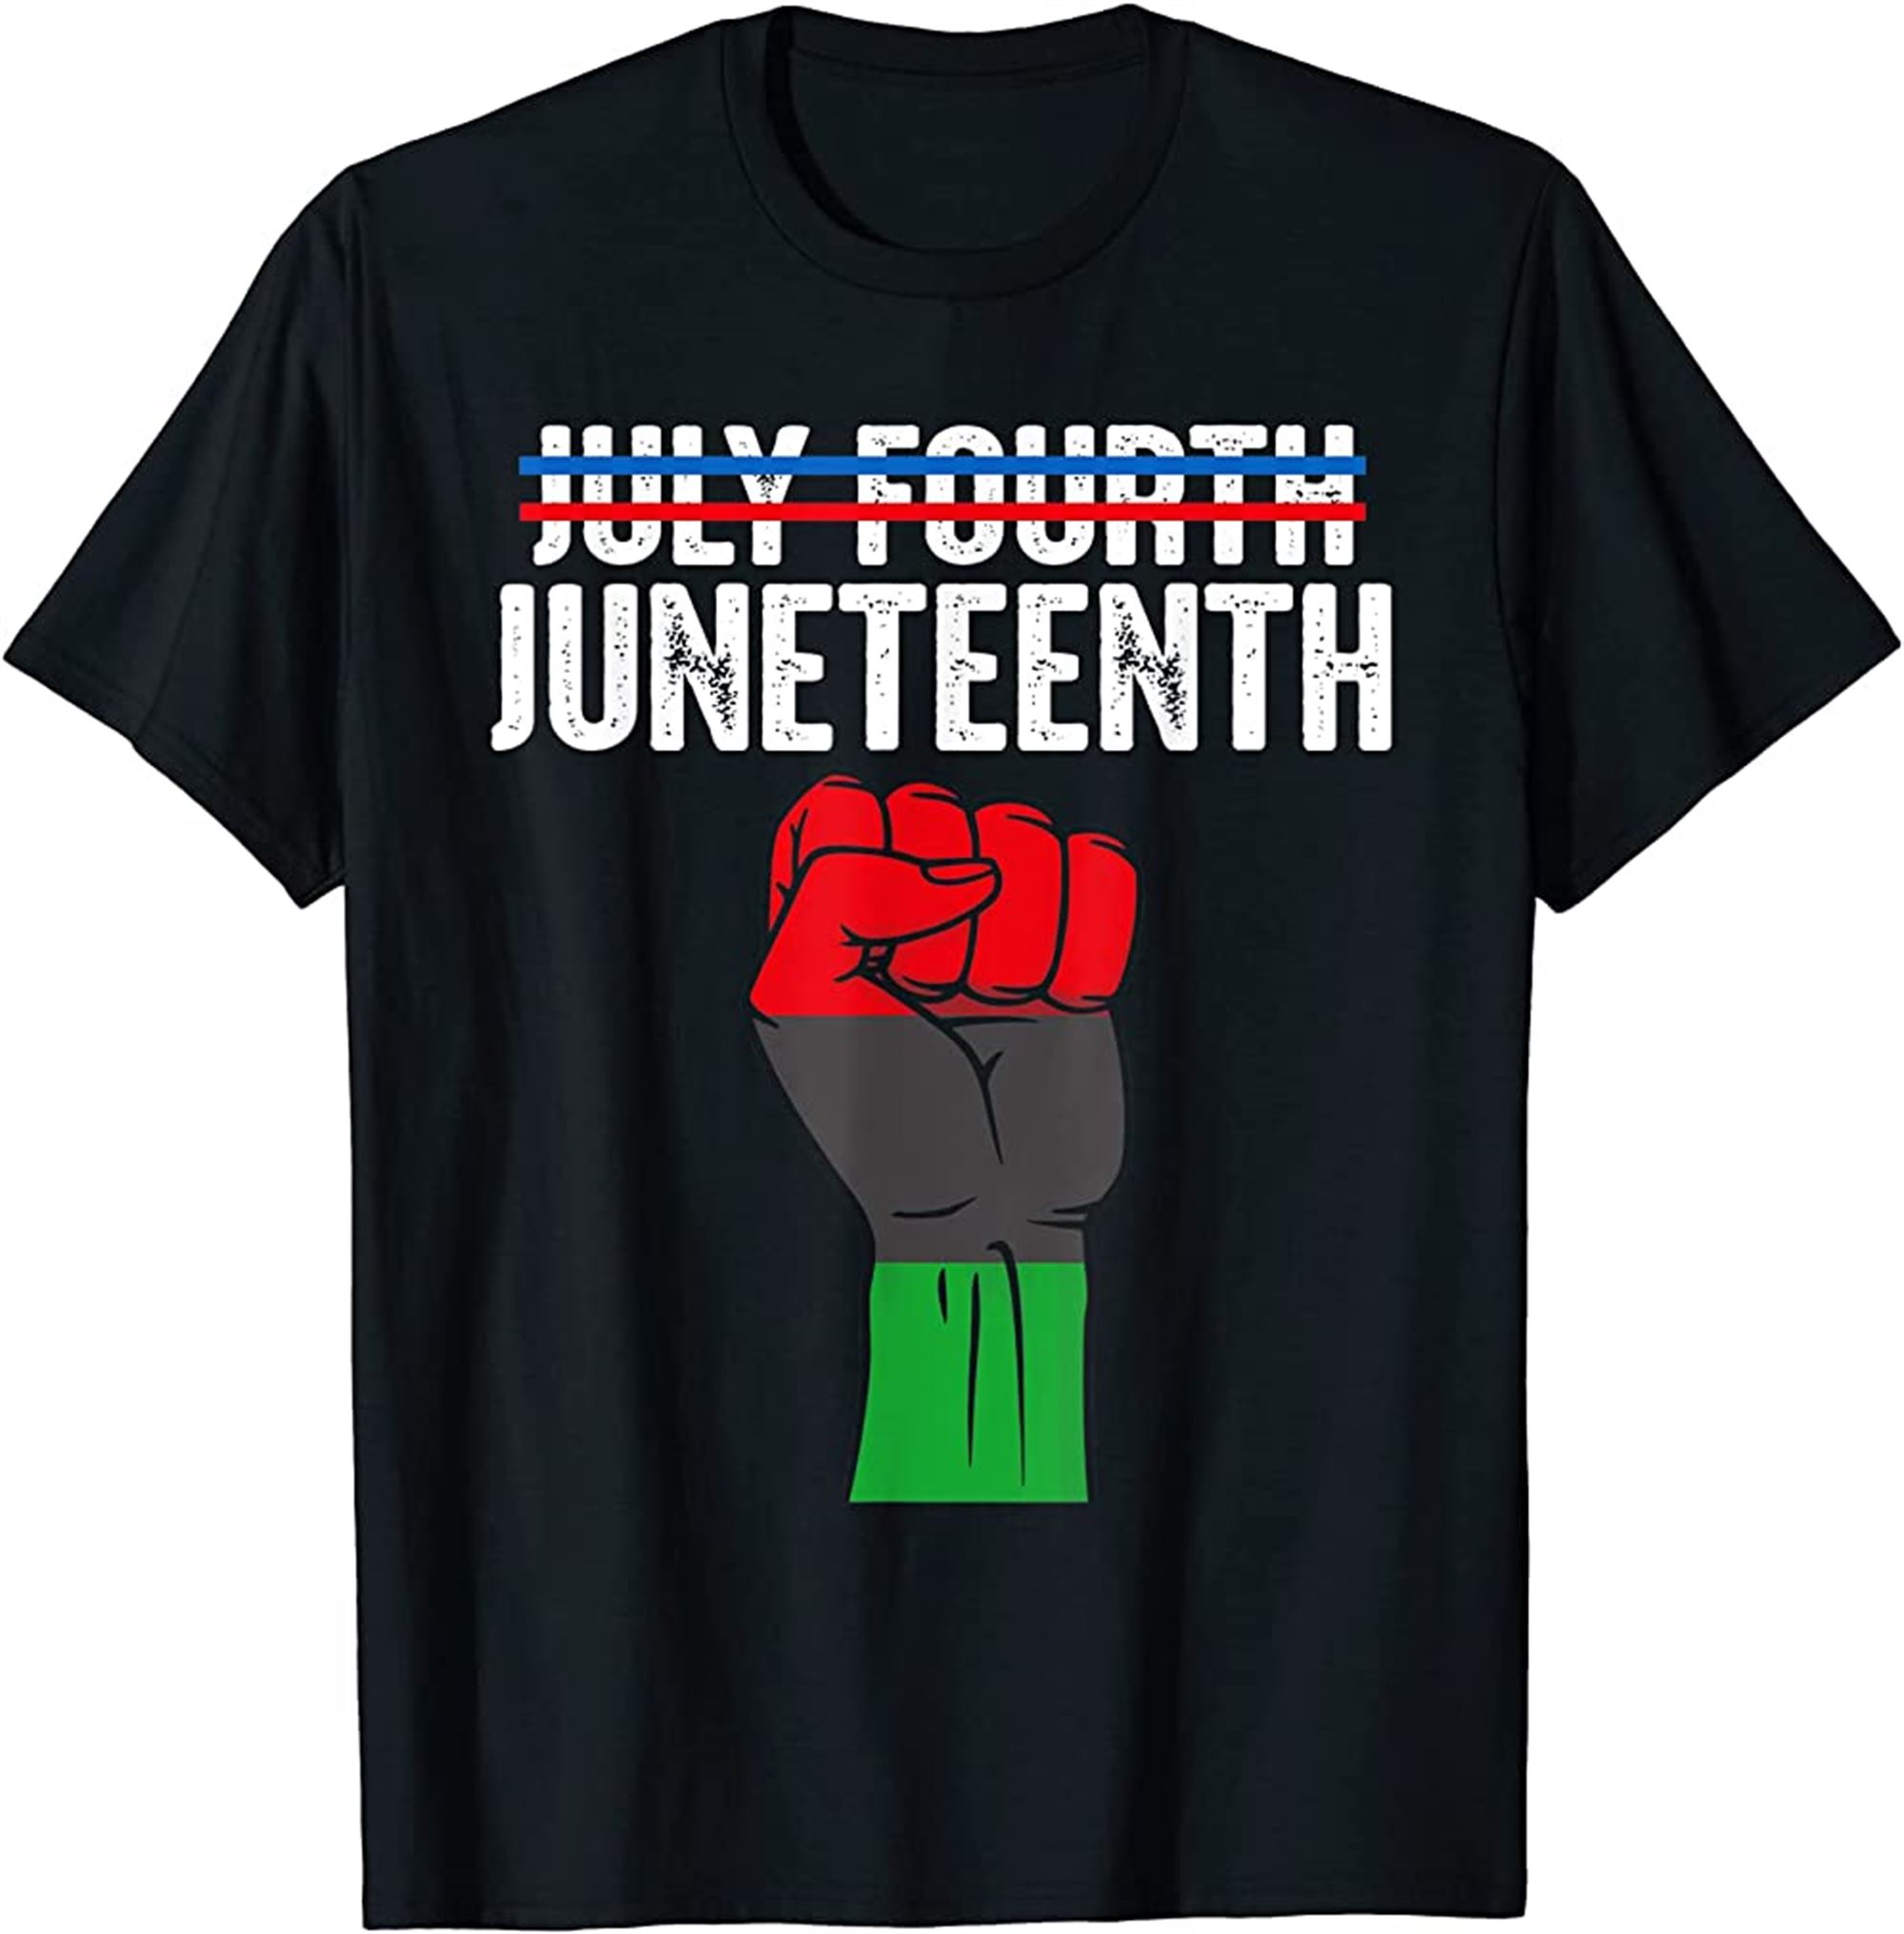 Juneteenth Not July Fourth Black Proud African American 1865 T-shirt Full Size Up To 5xl